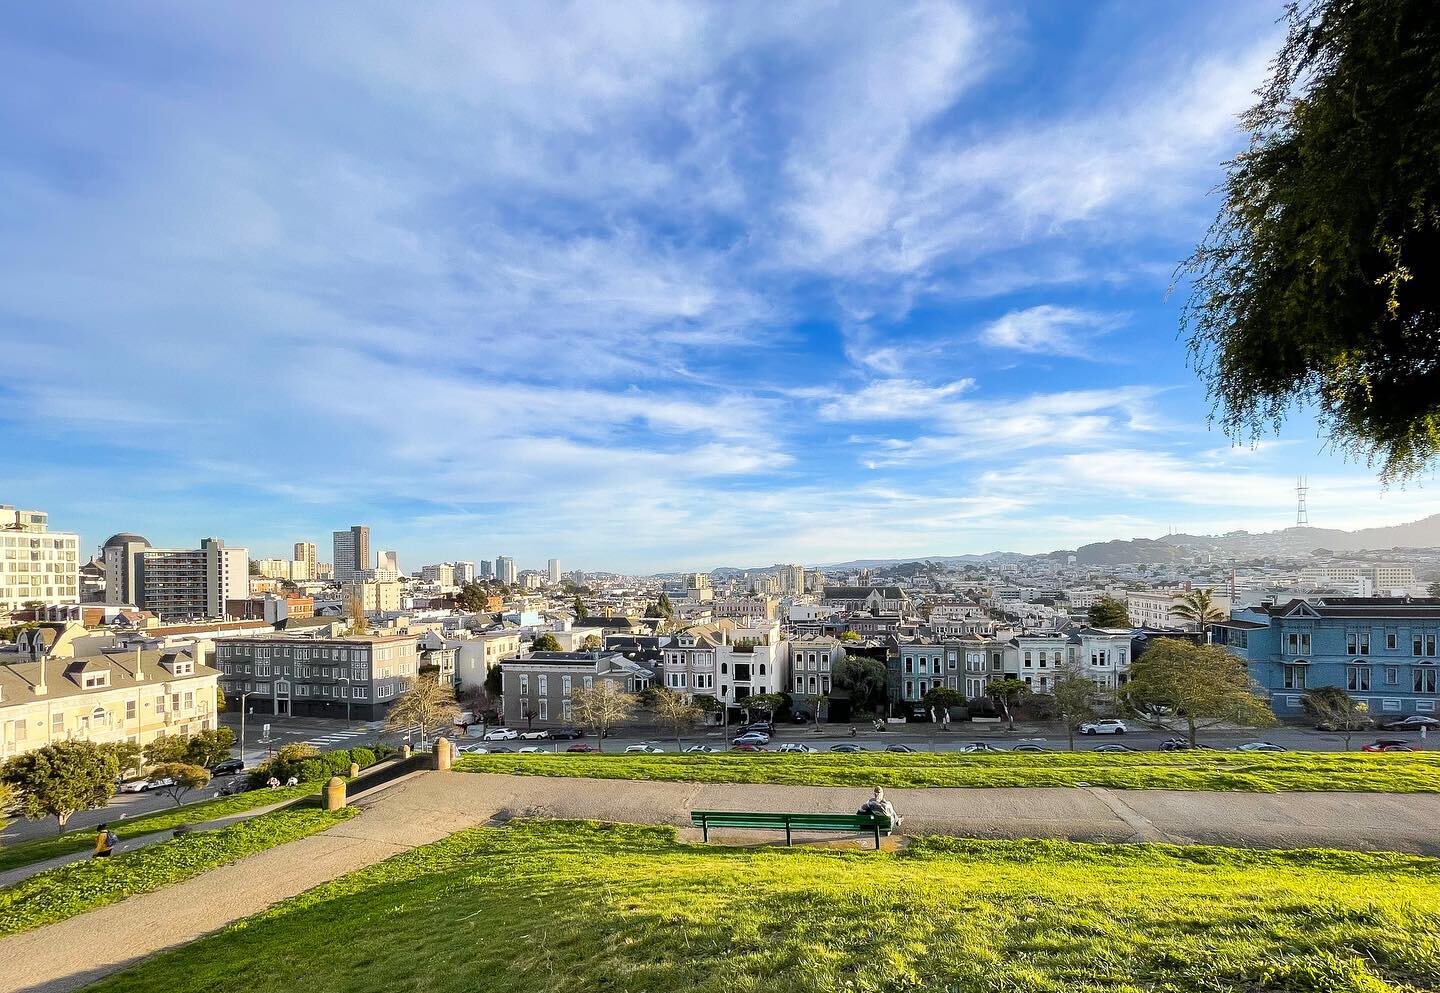 Do you wonder how does San Francisco look from the top of Alta Plaza stairs (see a couple of posts back)? Here is a sneak preview ☝️

📍 Alta Plaza Park, San Francisco

🚶&zwj;♀️ 3 out of 10 beautiful staircases in SF

#altaplazapark #howsfseessf #al